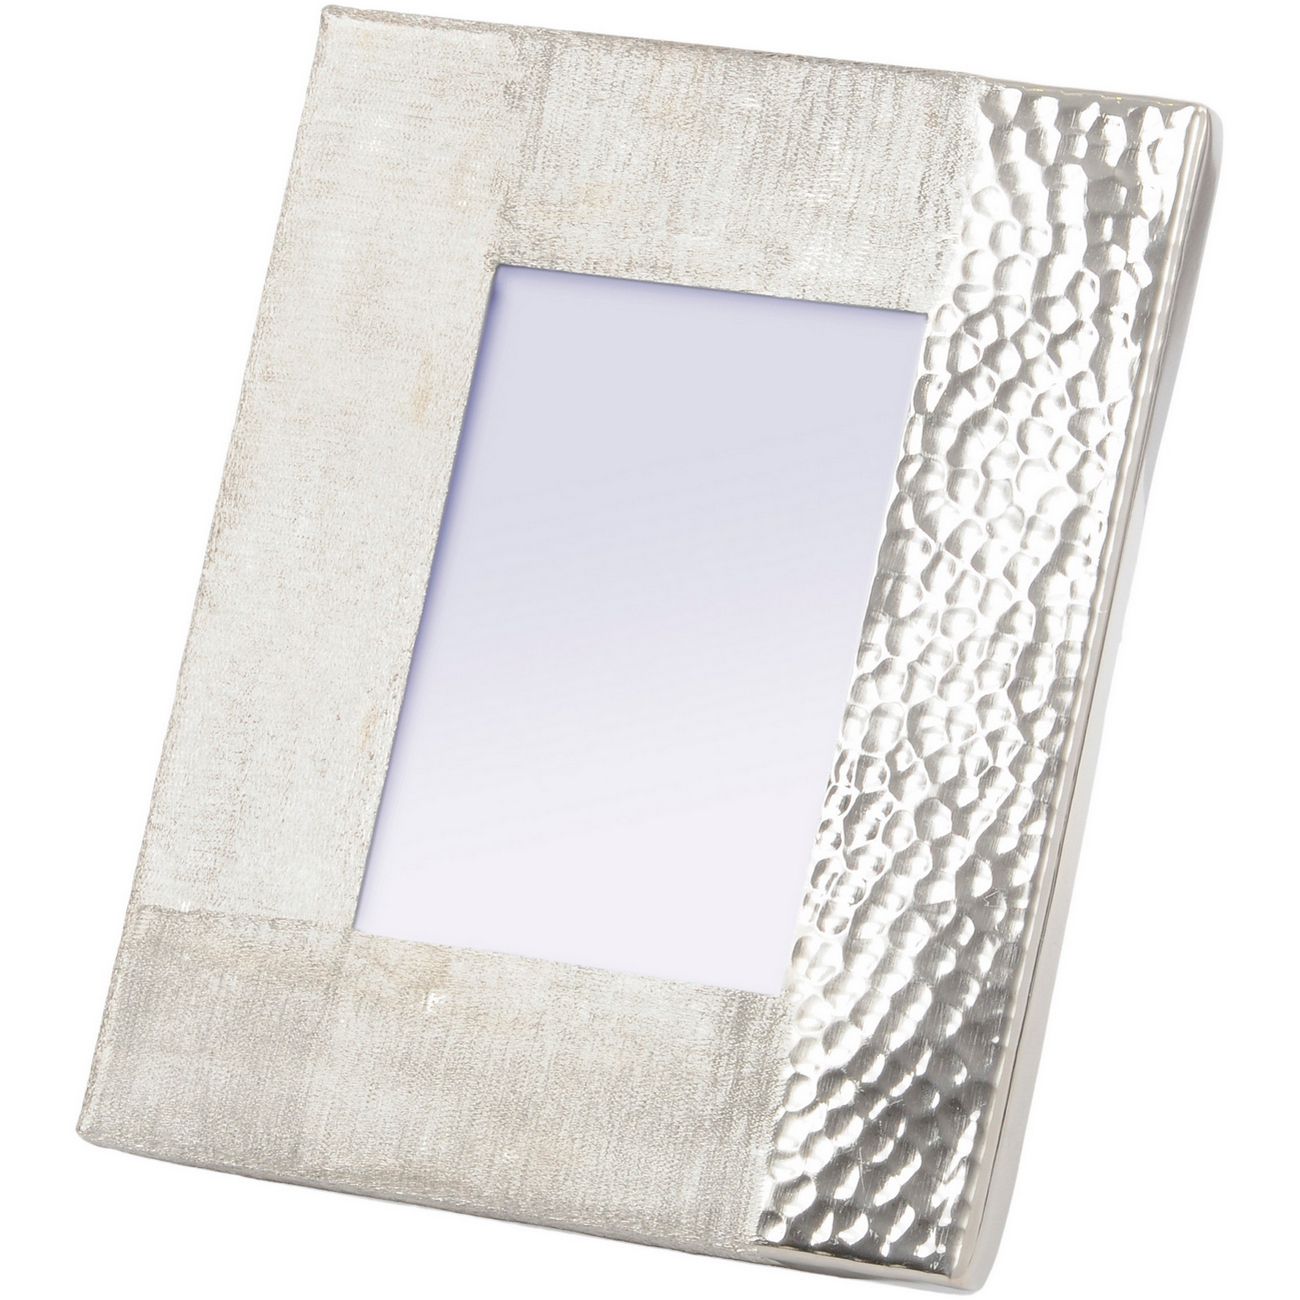 Fuse Hammered and Brushed 5X7 Inch Photo Frame in Silver Finish